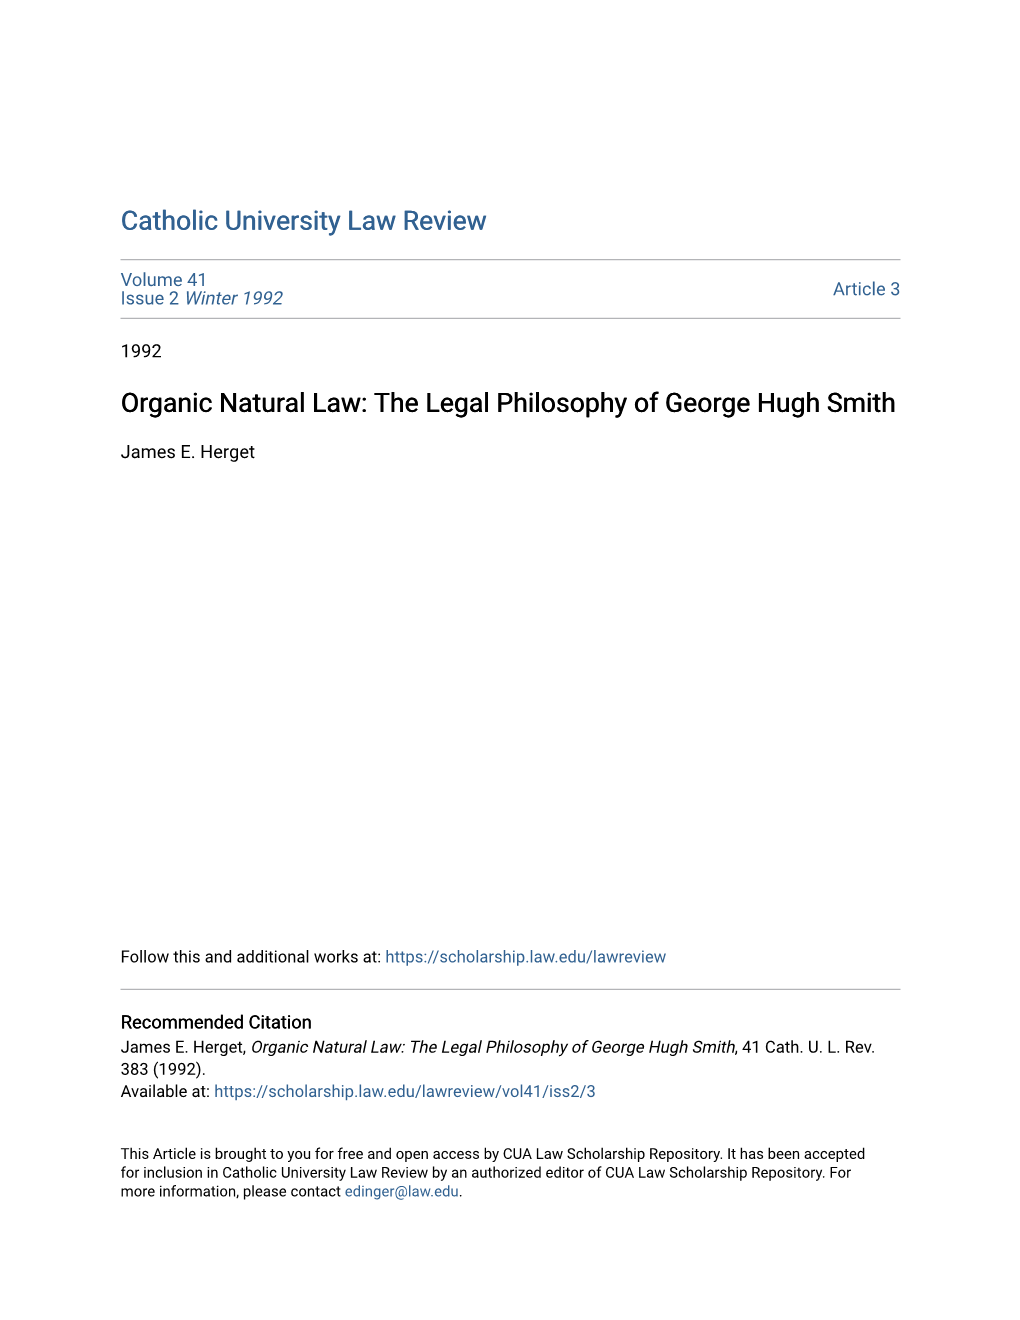 Organic Natural Law: the Legal Philosophy of George Hugh Smith